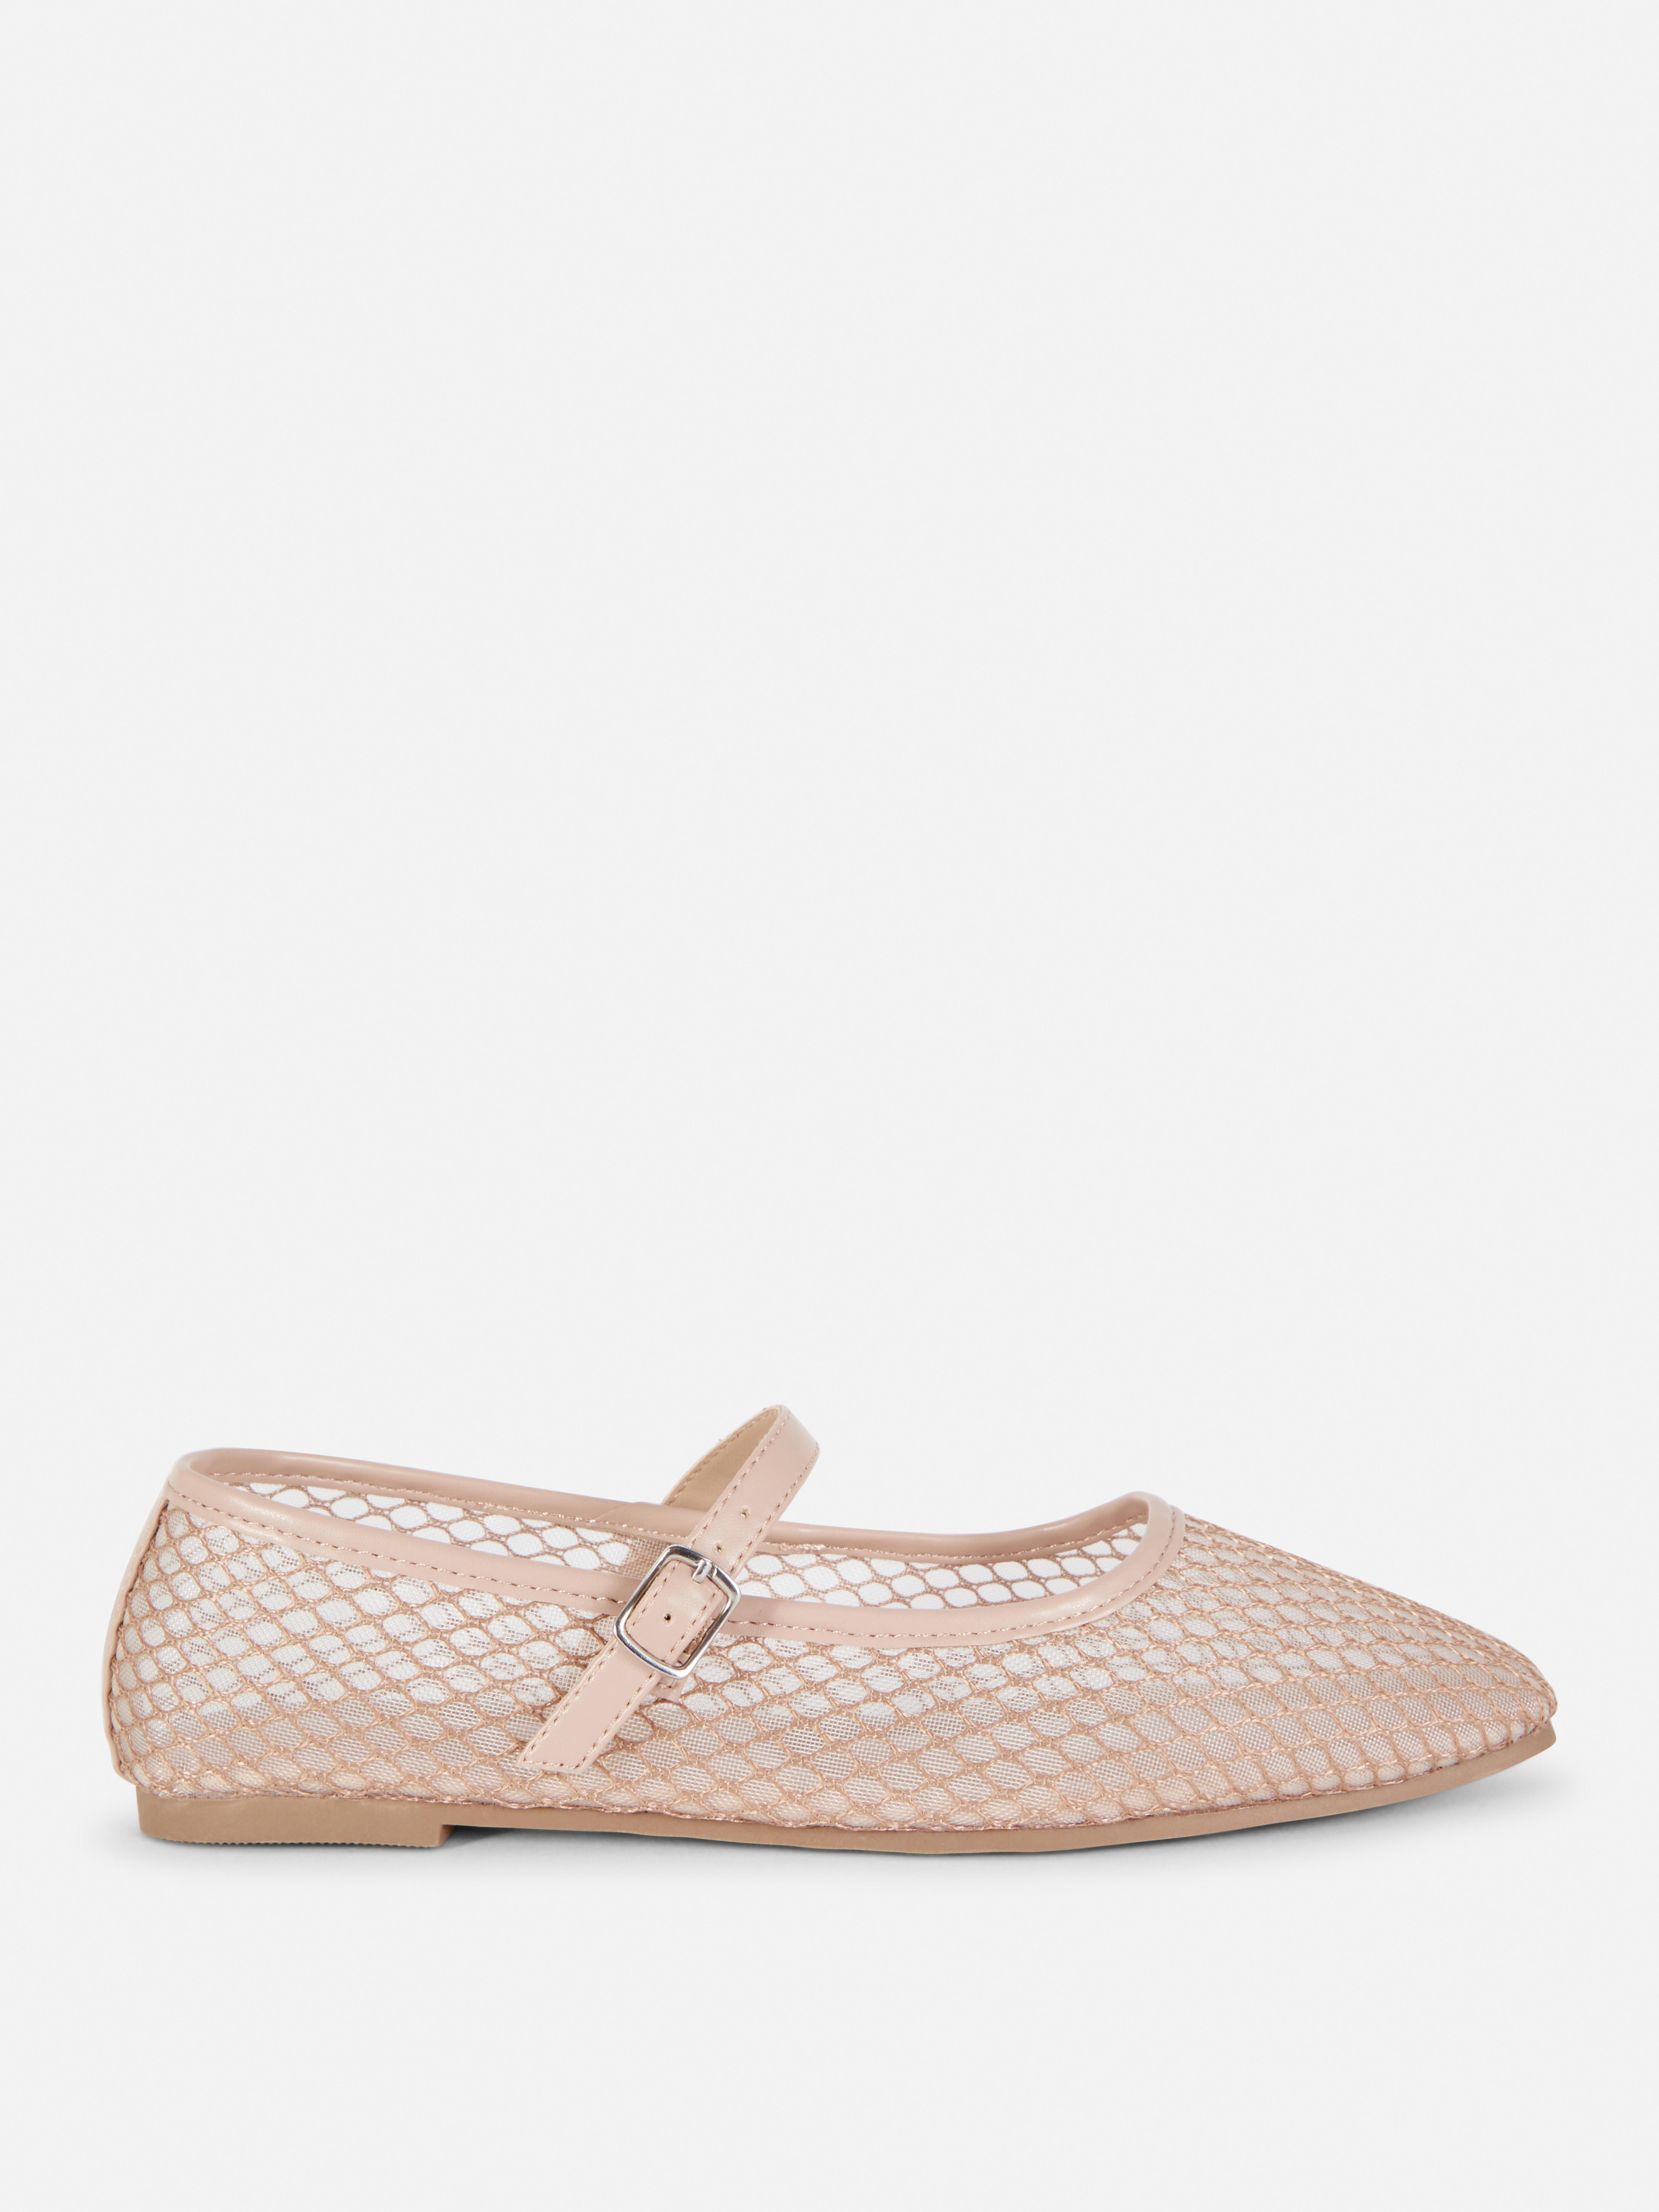 Women's Flat Shoes | Ballet Flats & Chunky Loafers | Primark